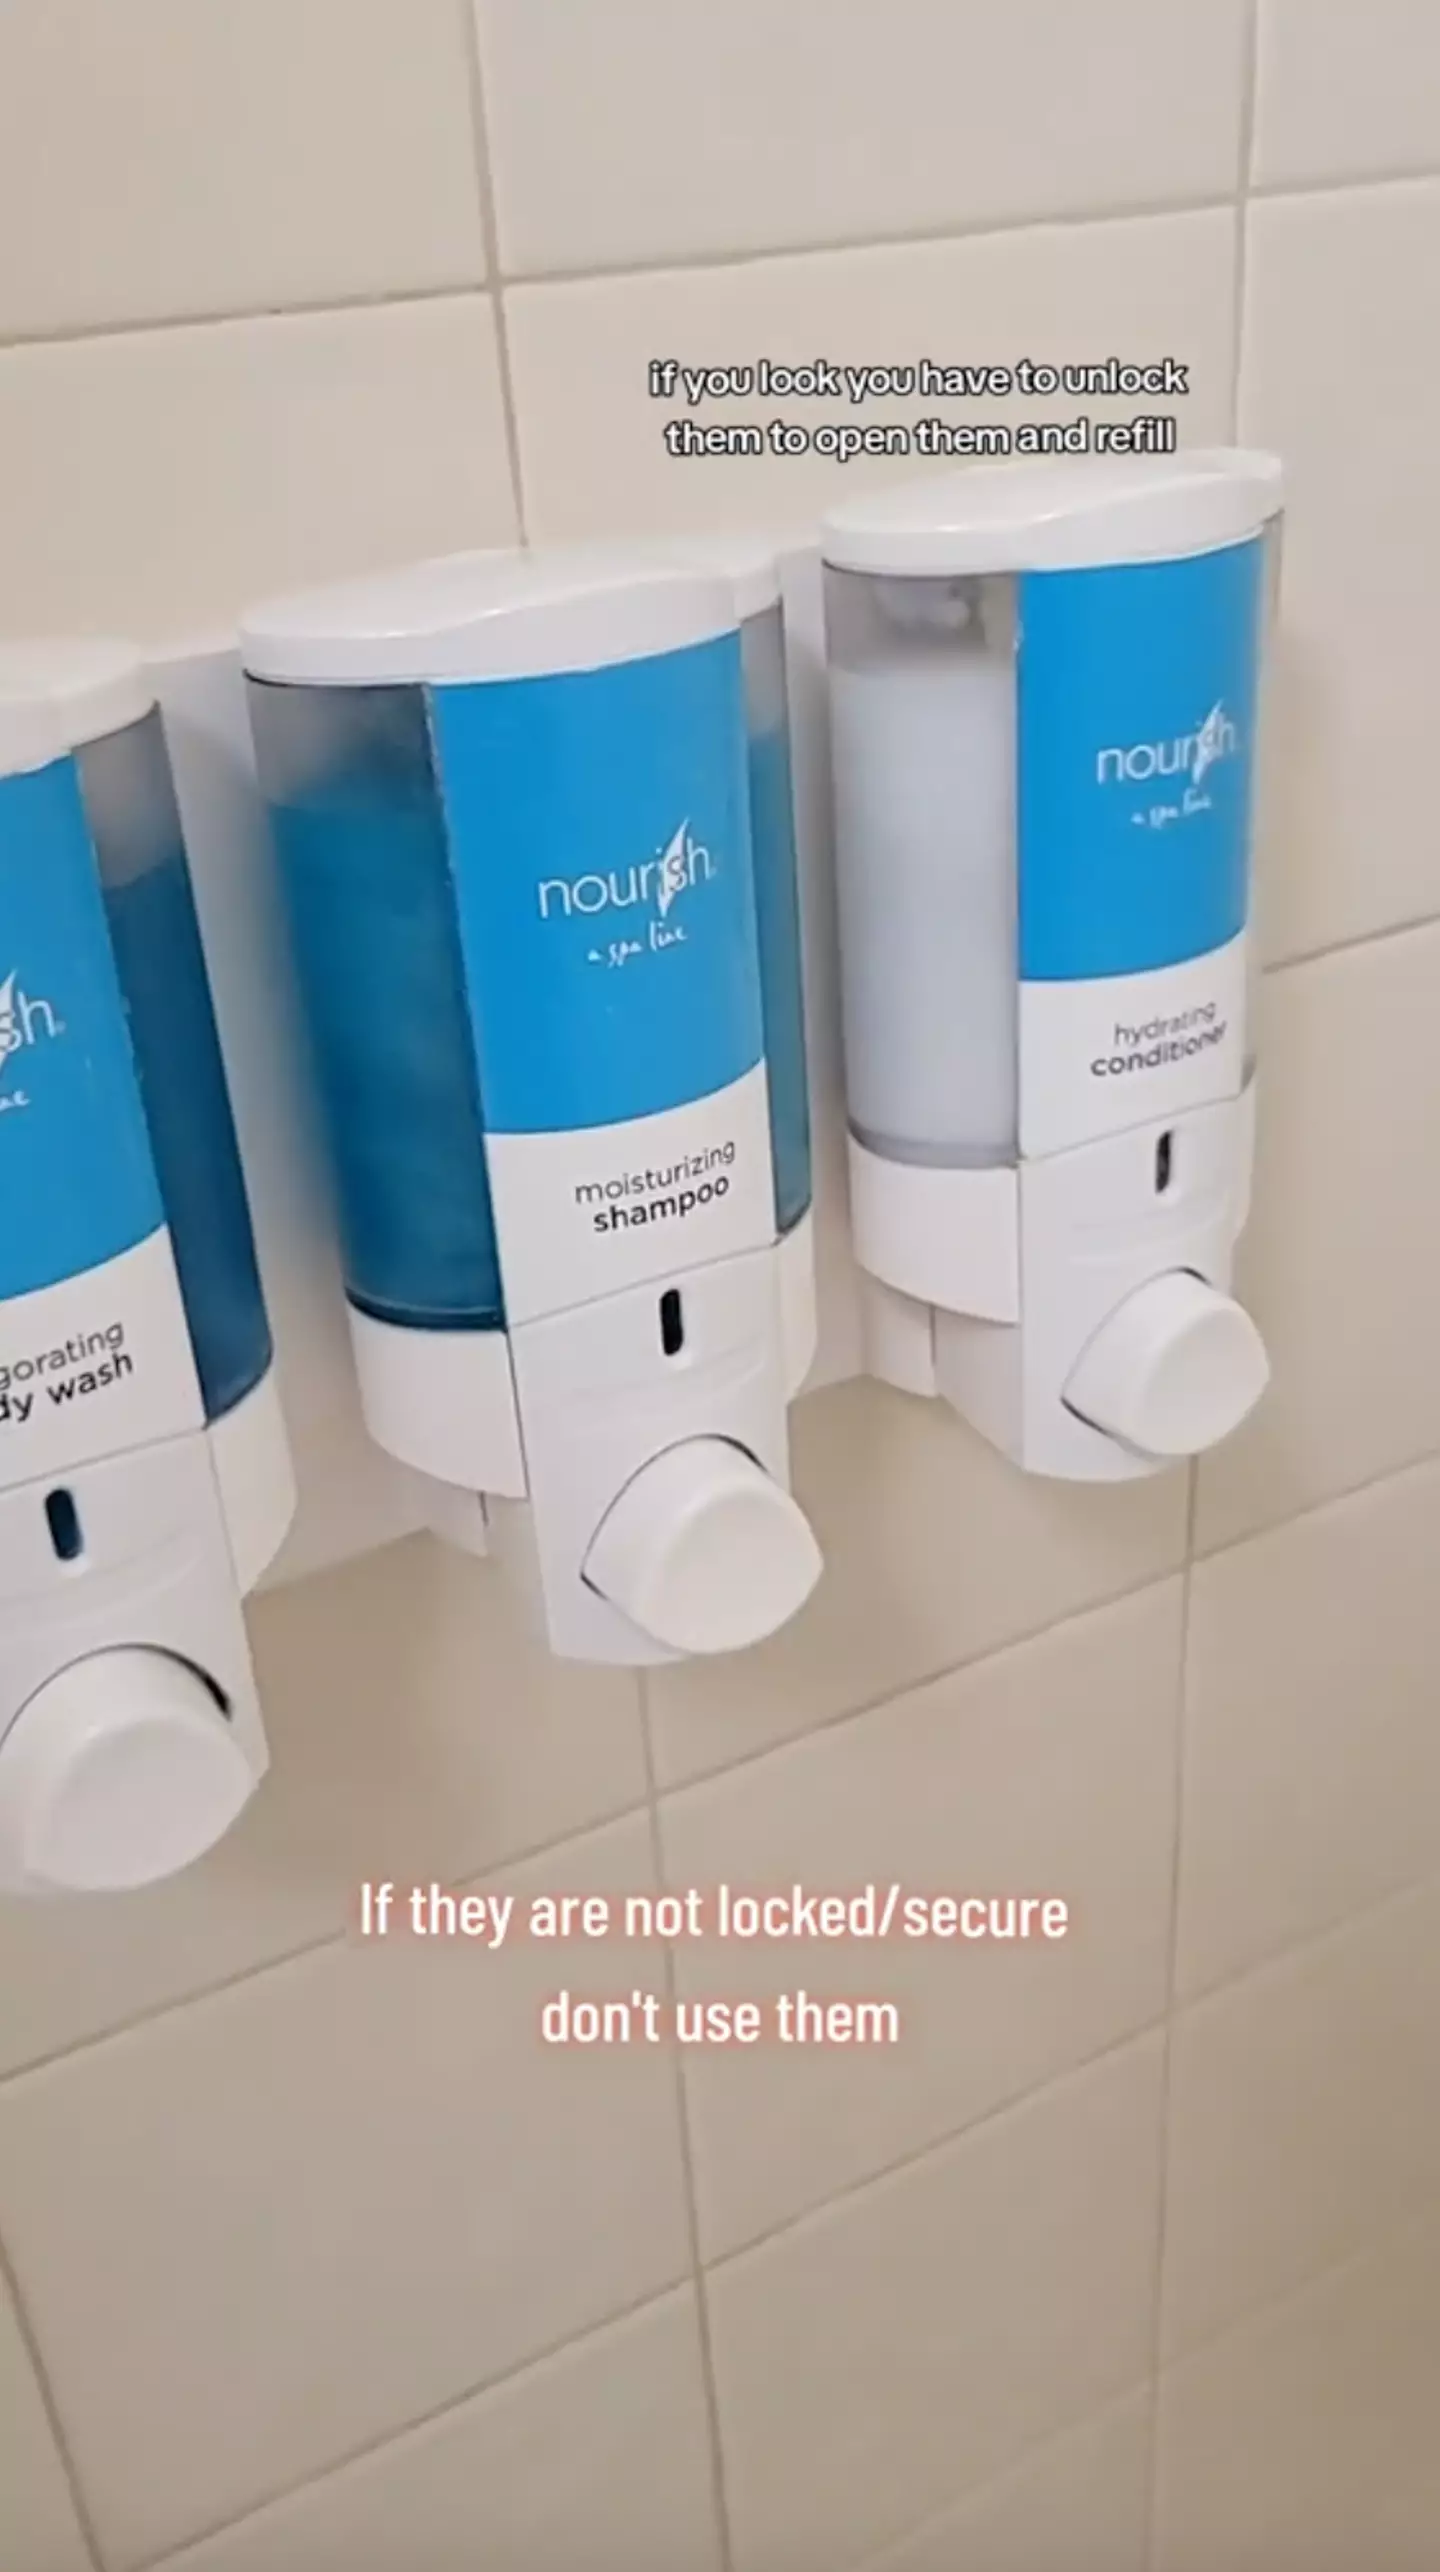 Secured dispensers are said to be the better option.